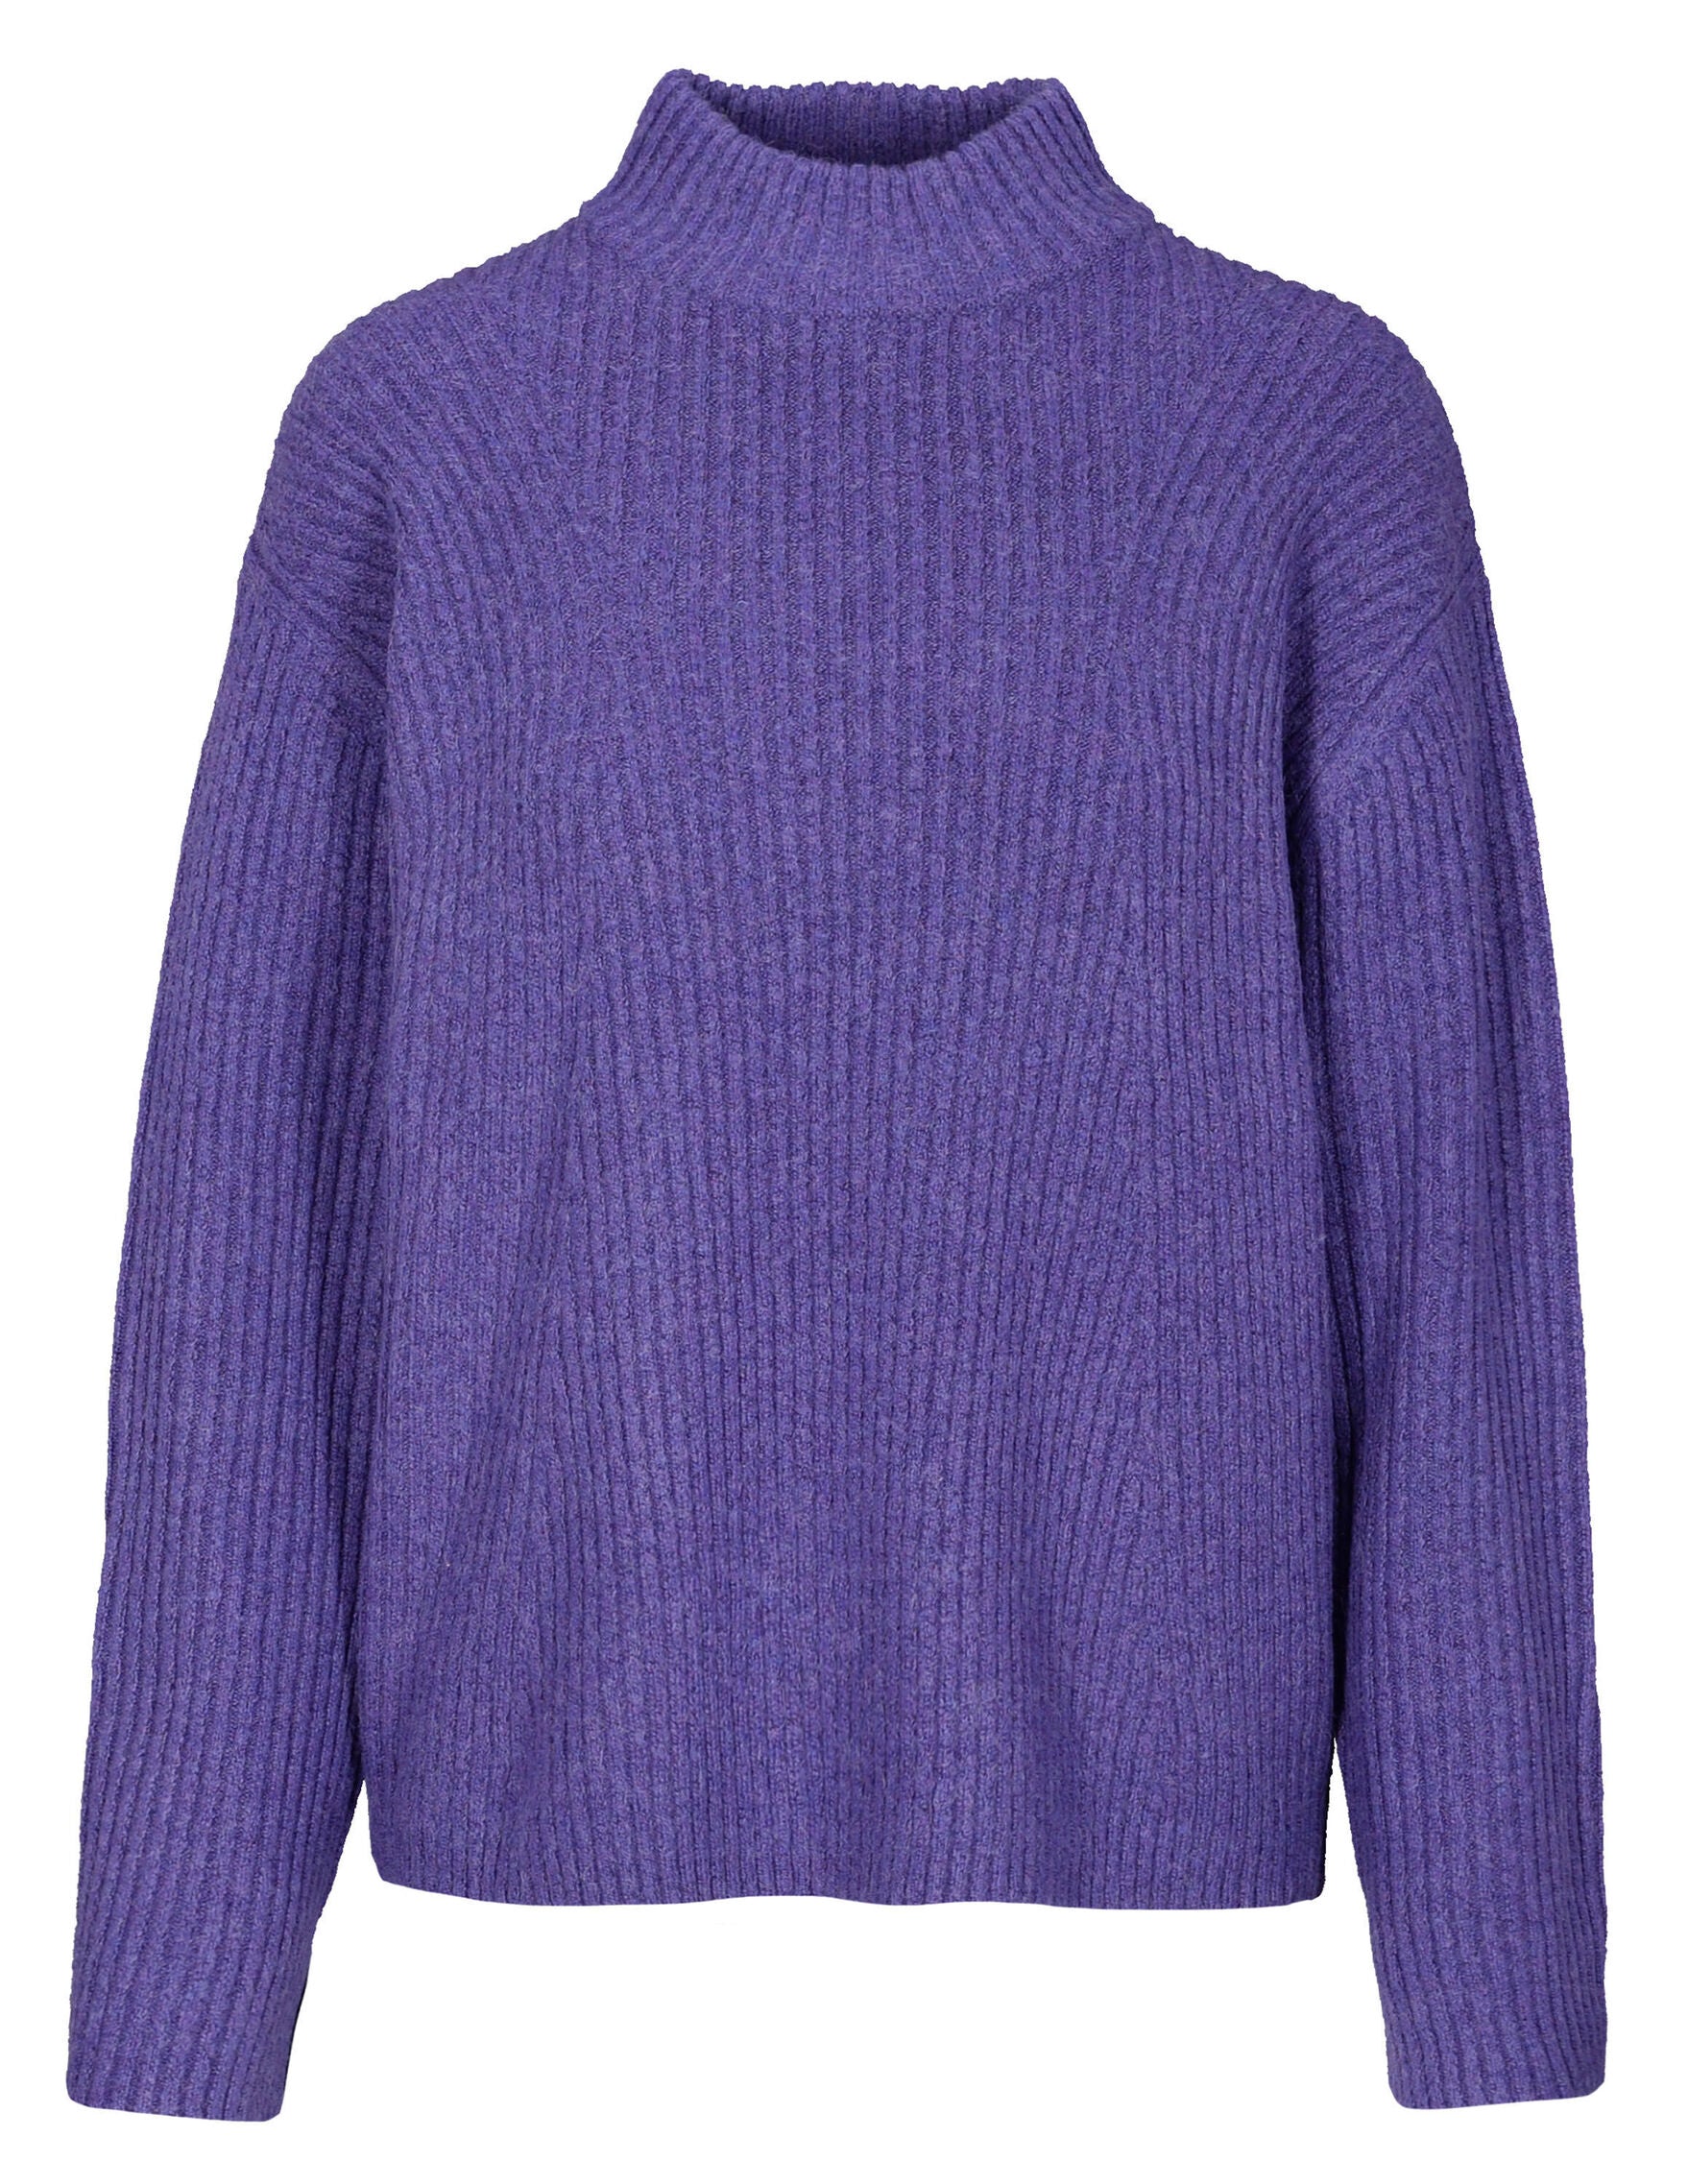 Turtleneck sweater knitted